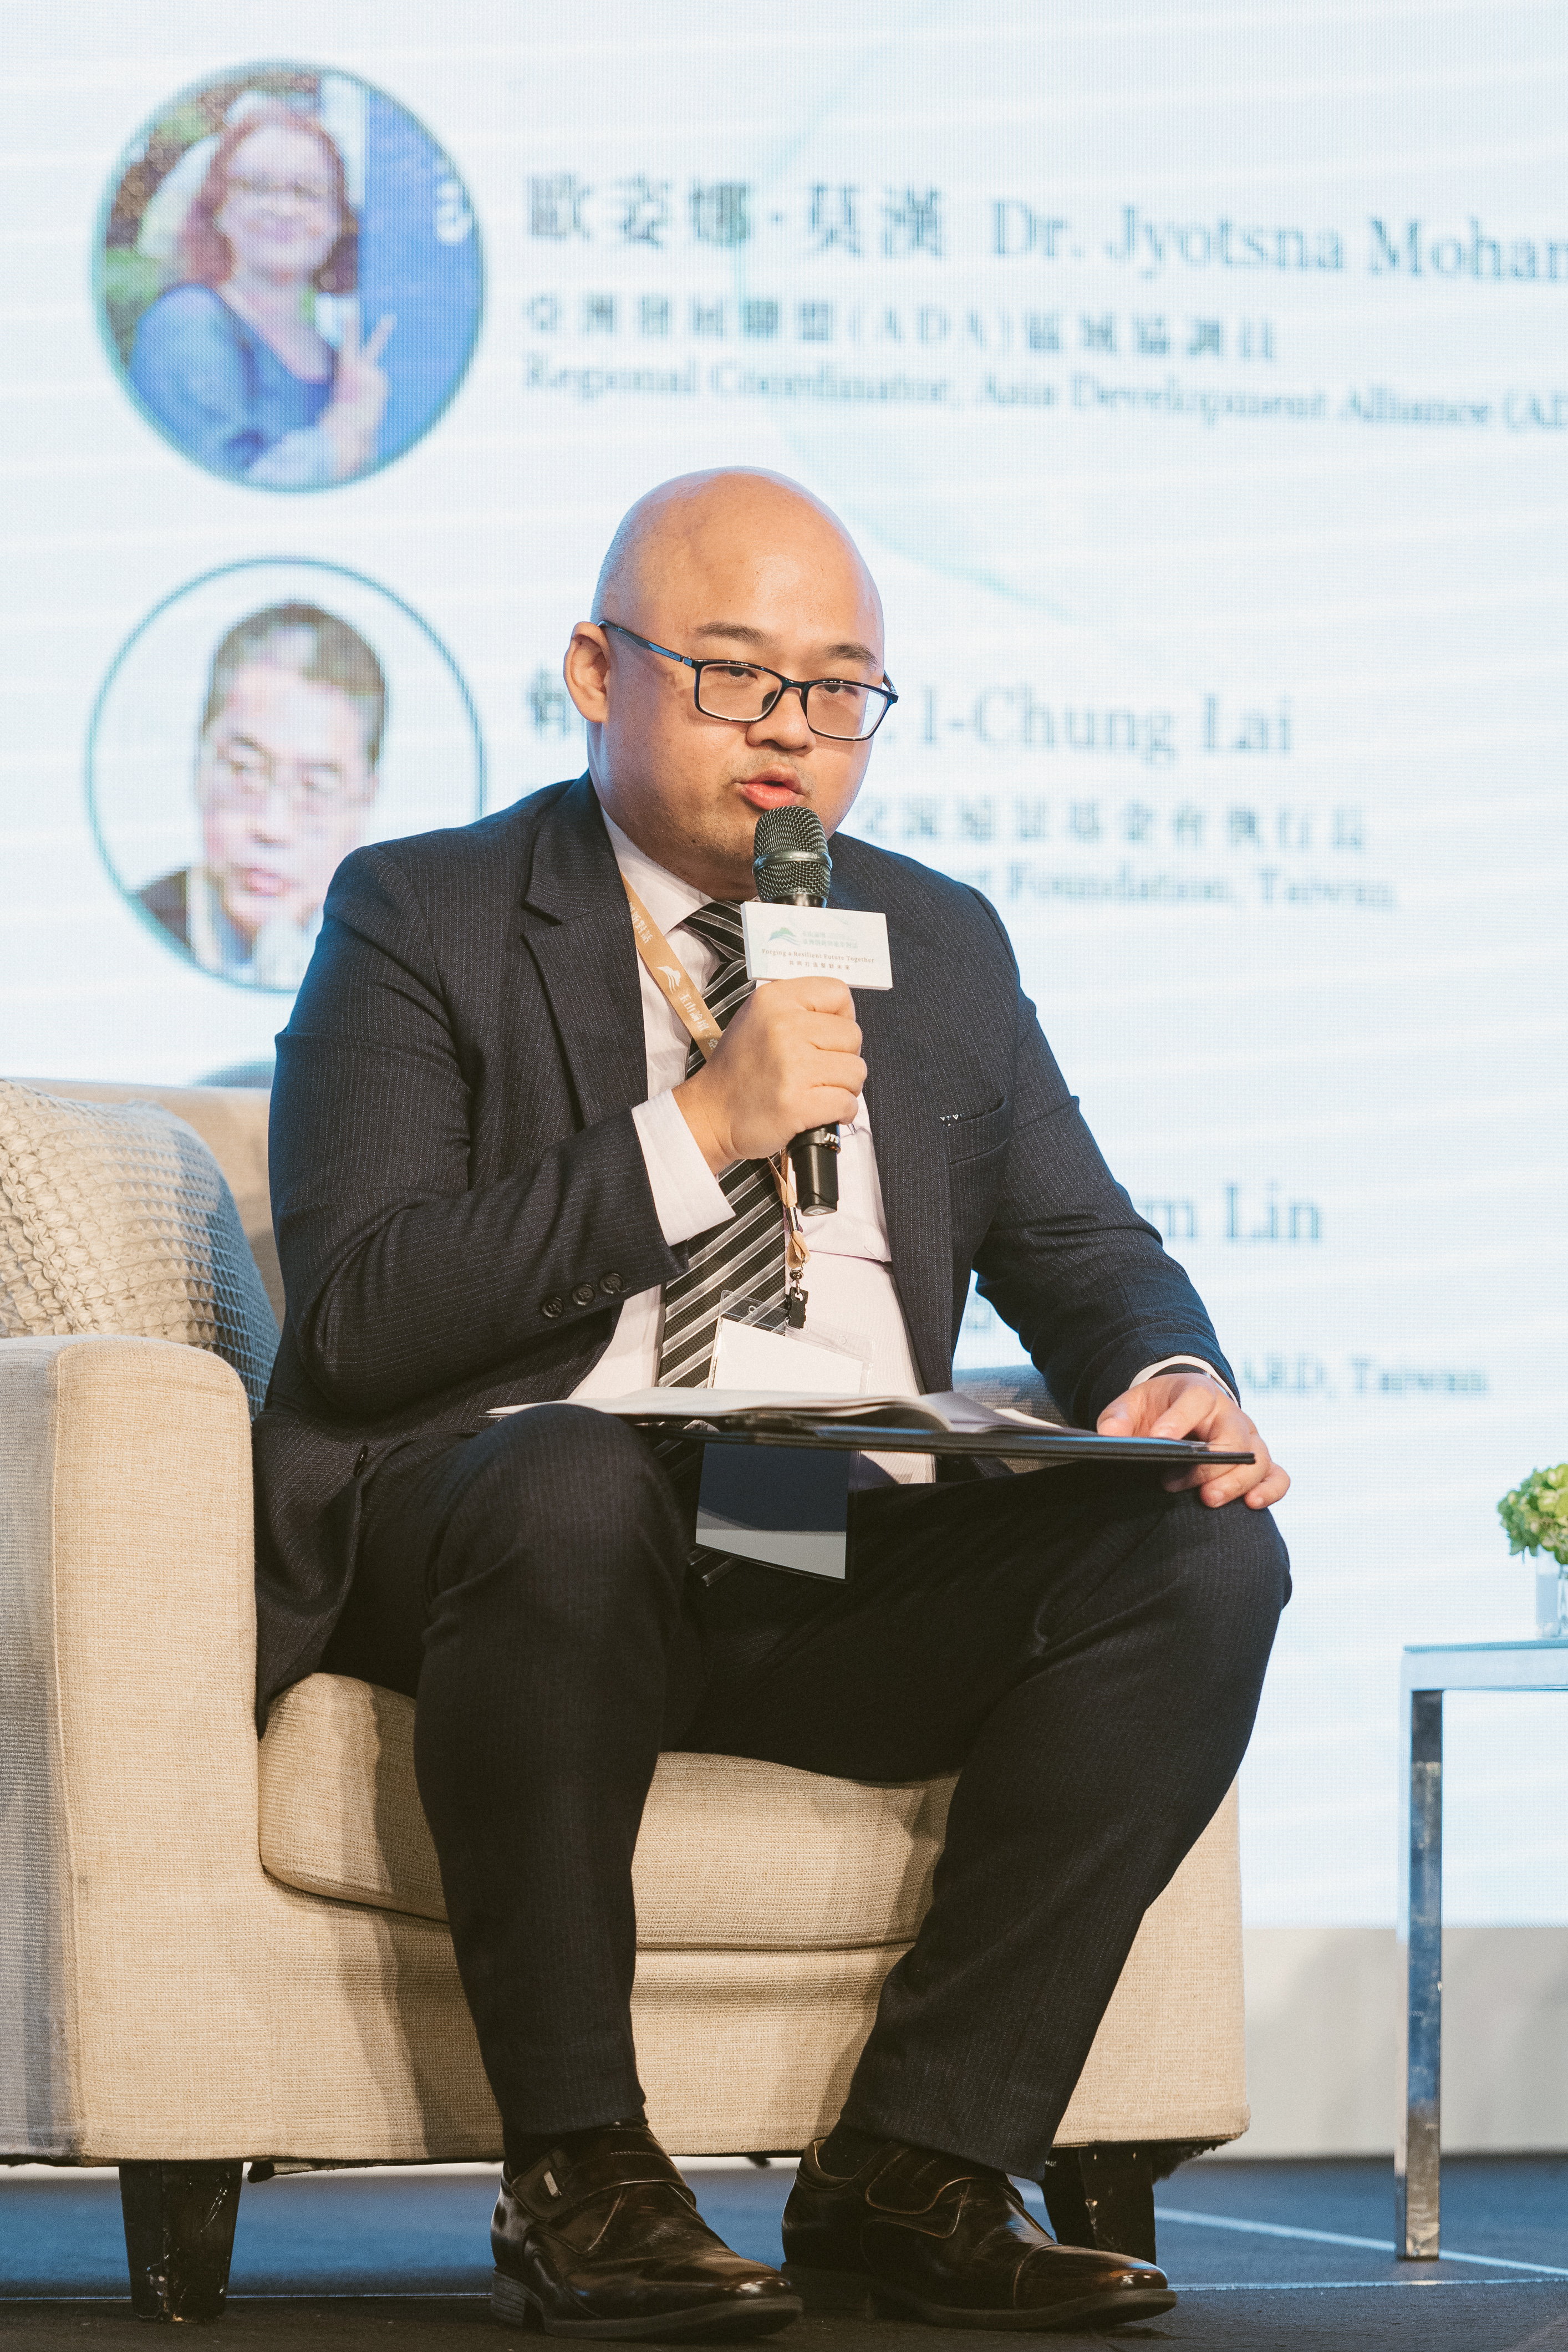 Alan H. Yang, the Executive Director of TAEF, as the moderator of the session